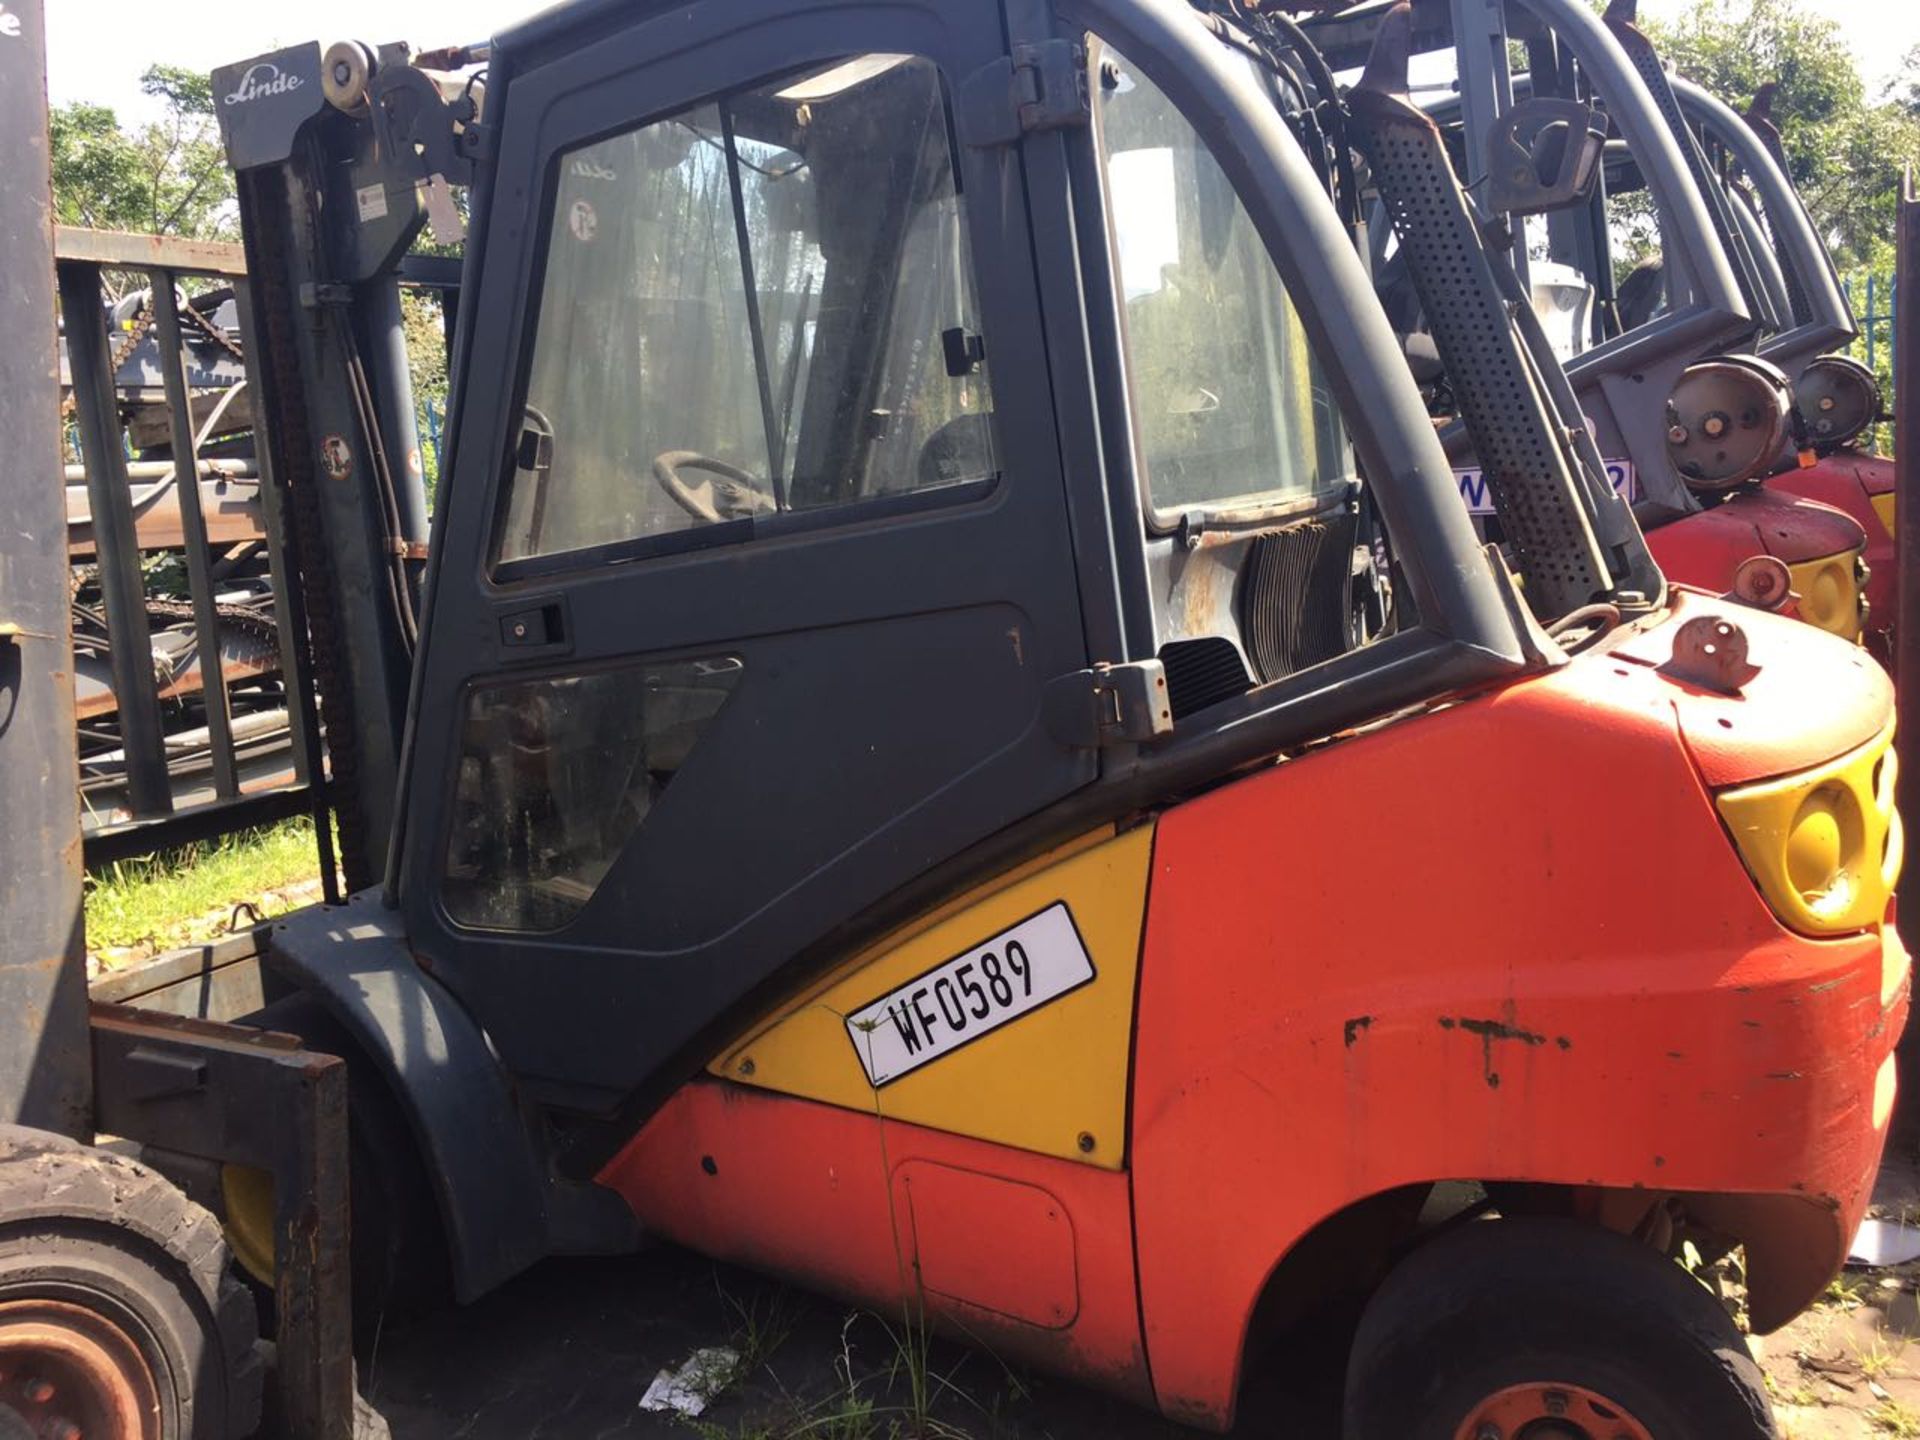 2006 LINDE H30T 3 TON GAS FORKLIFT (15,026 HOURS - HOURS NOT GUARANTEED BY AUCTIONEER) H2X393T02358 - Image 3 of 3